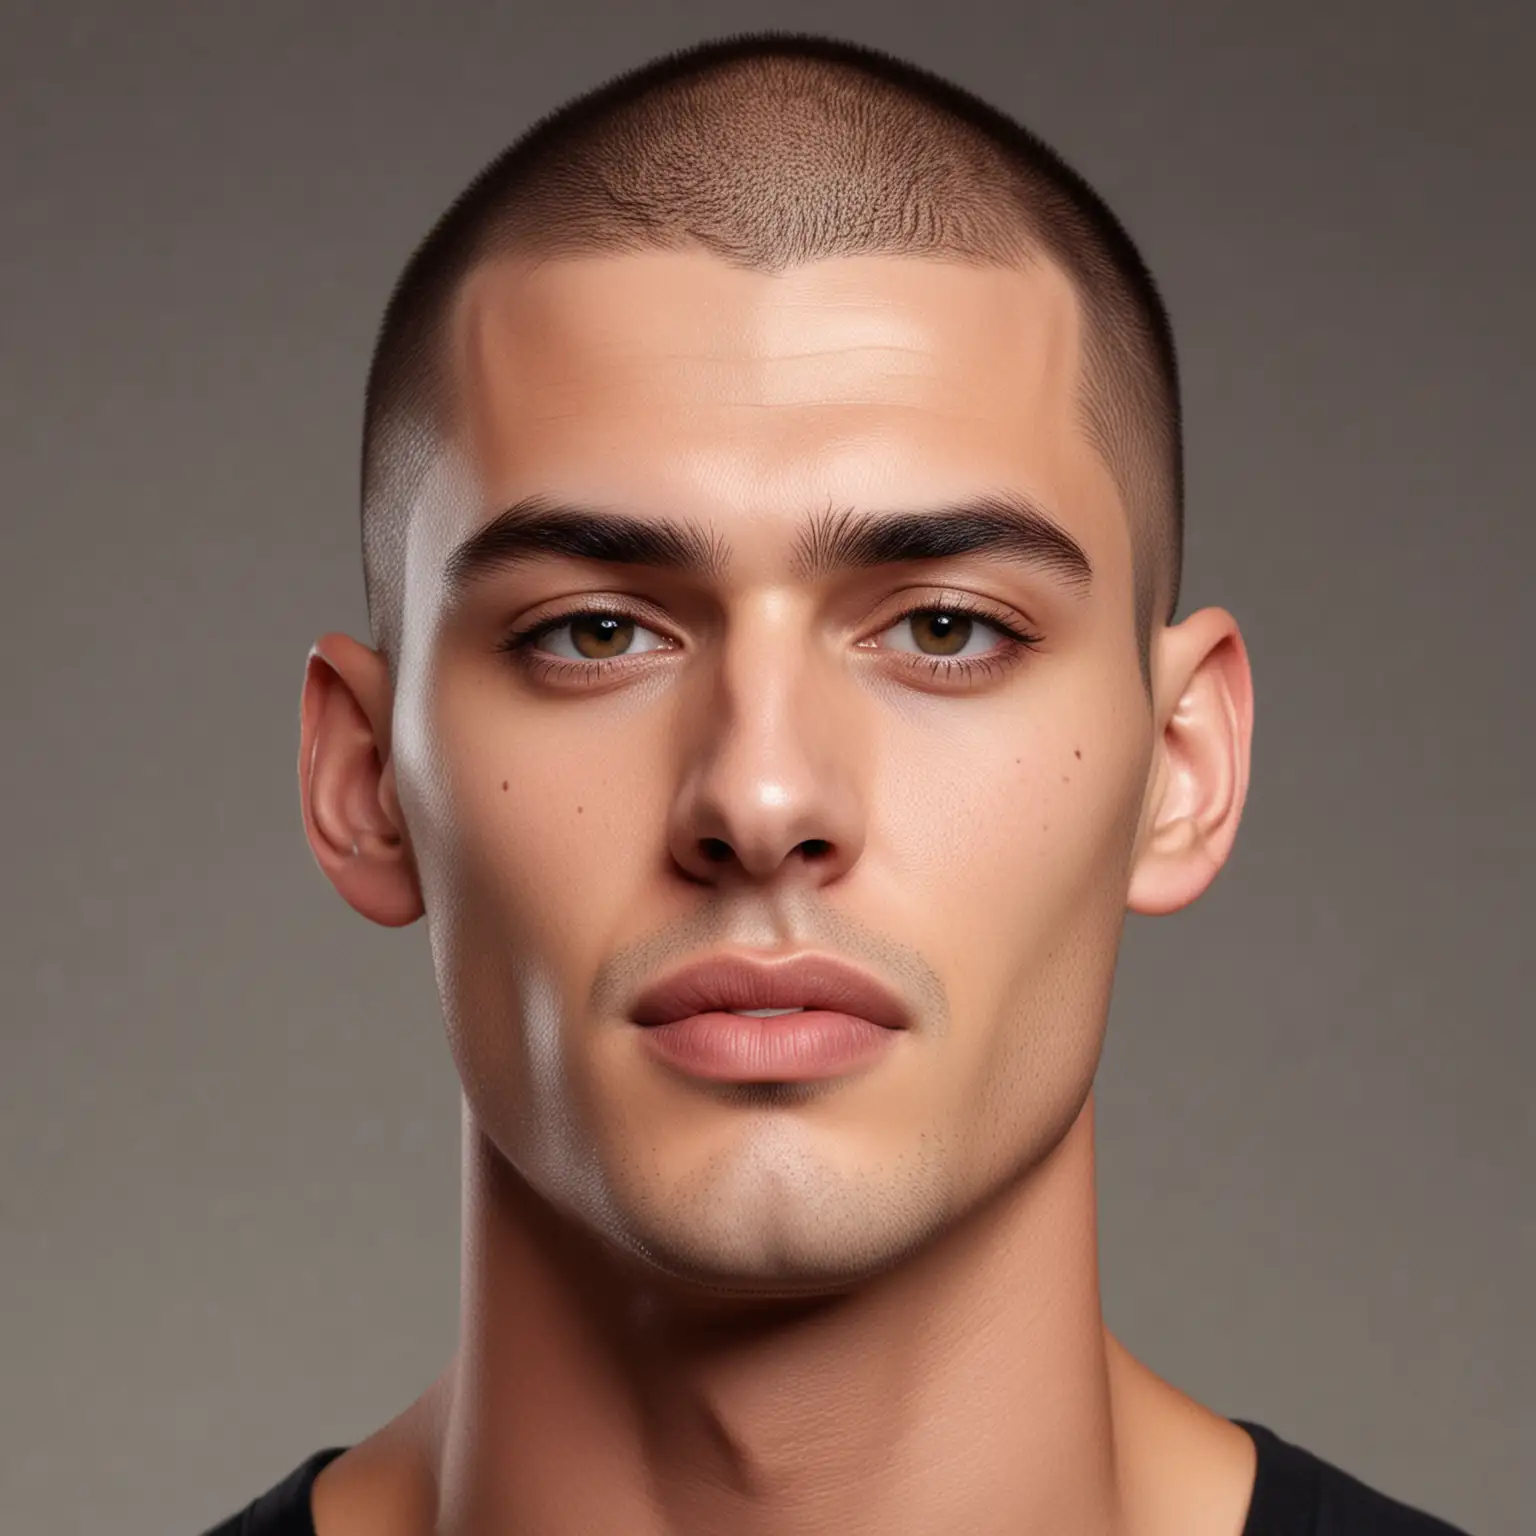 Symmetric Bald Male Model with Thick Brows in High Definition Portrait